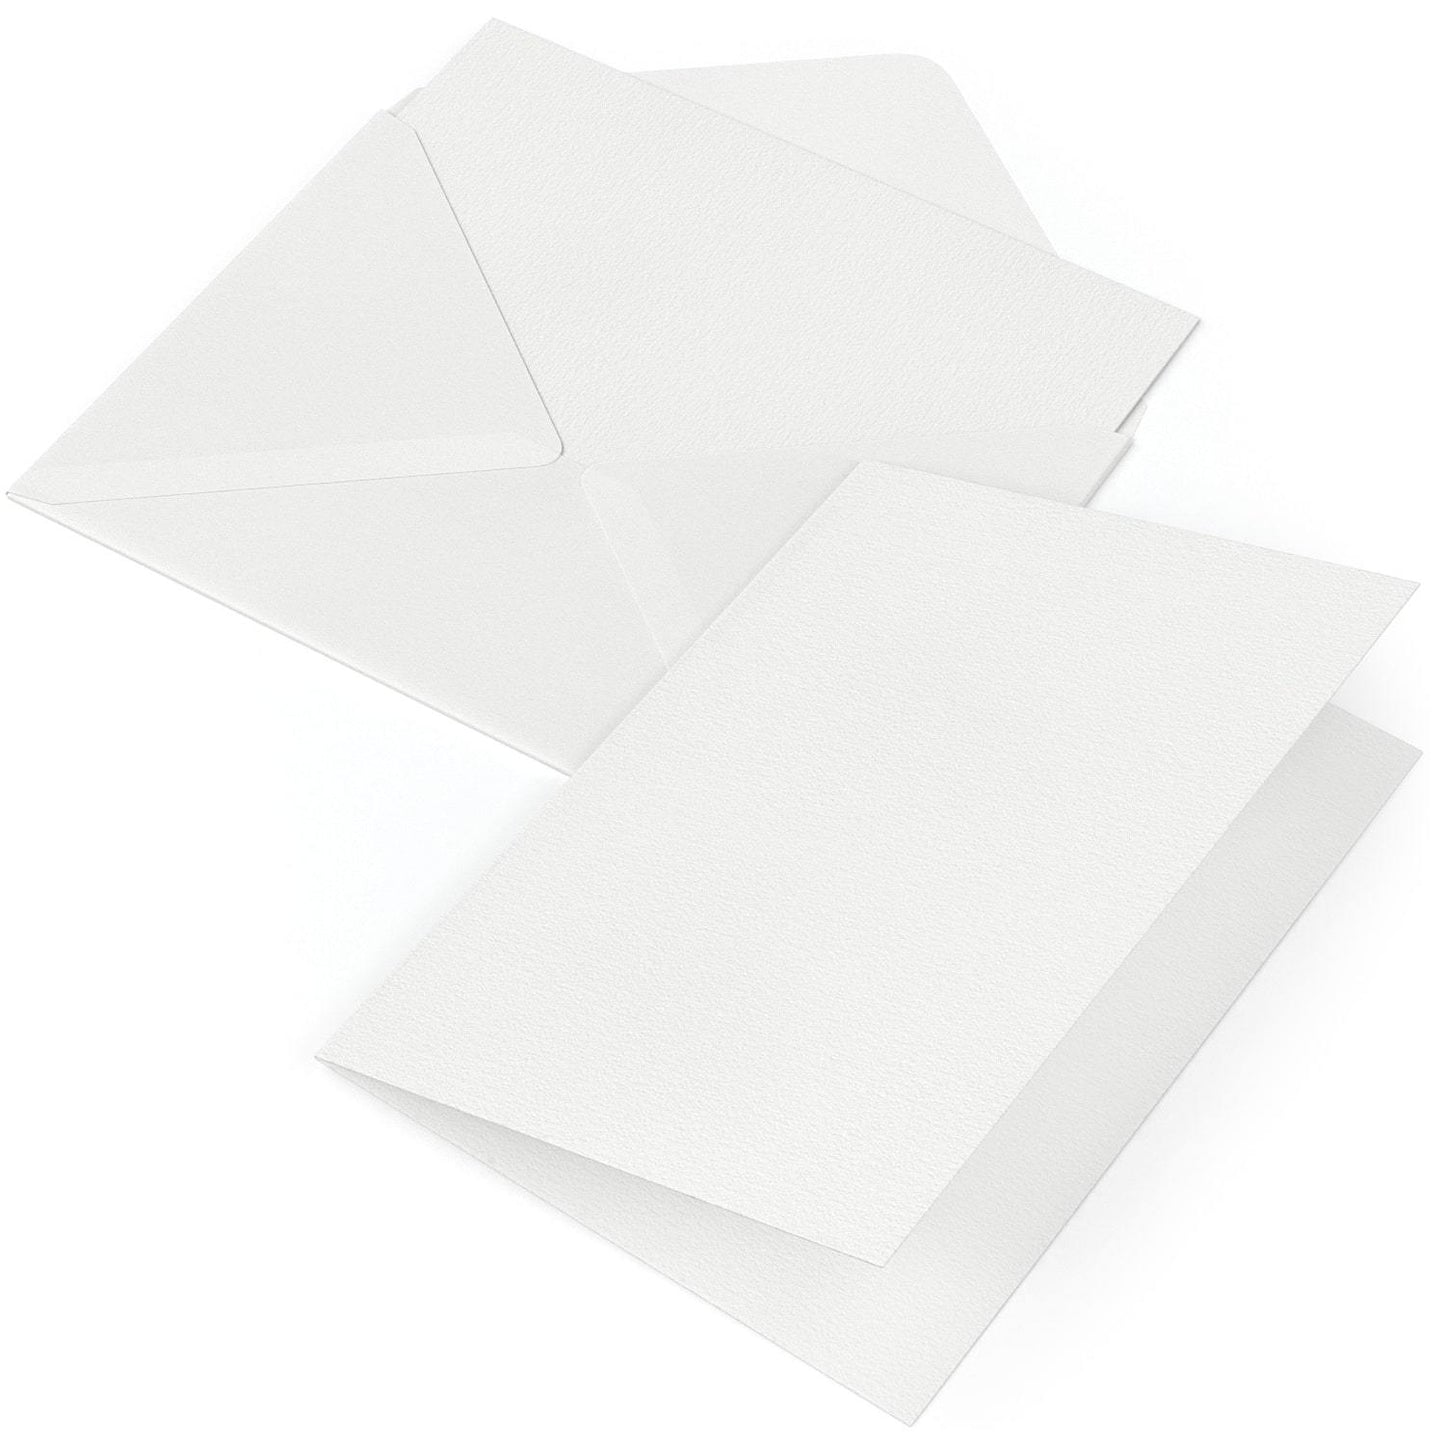  50 Packs Blank Watercolor Cards with Envelopes Set, 140lb  Heavyweight 100% Cotton Watercolor Cards, 5x7 Inch Foldable Watercolor  Cards and Envelopes to Paint or Cards Making for Christmas Birthday